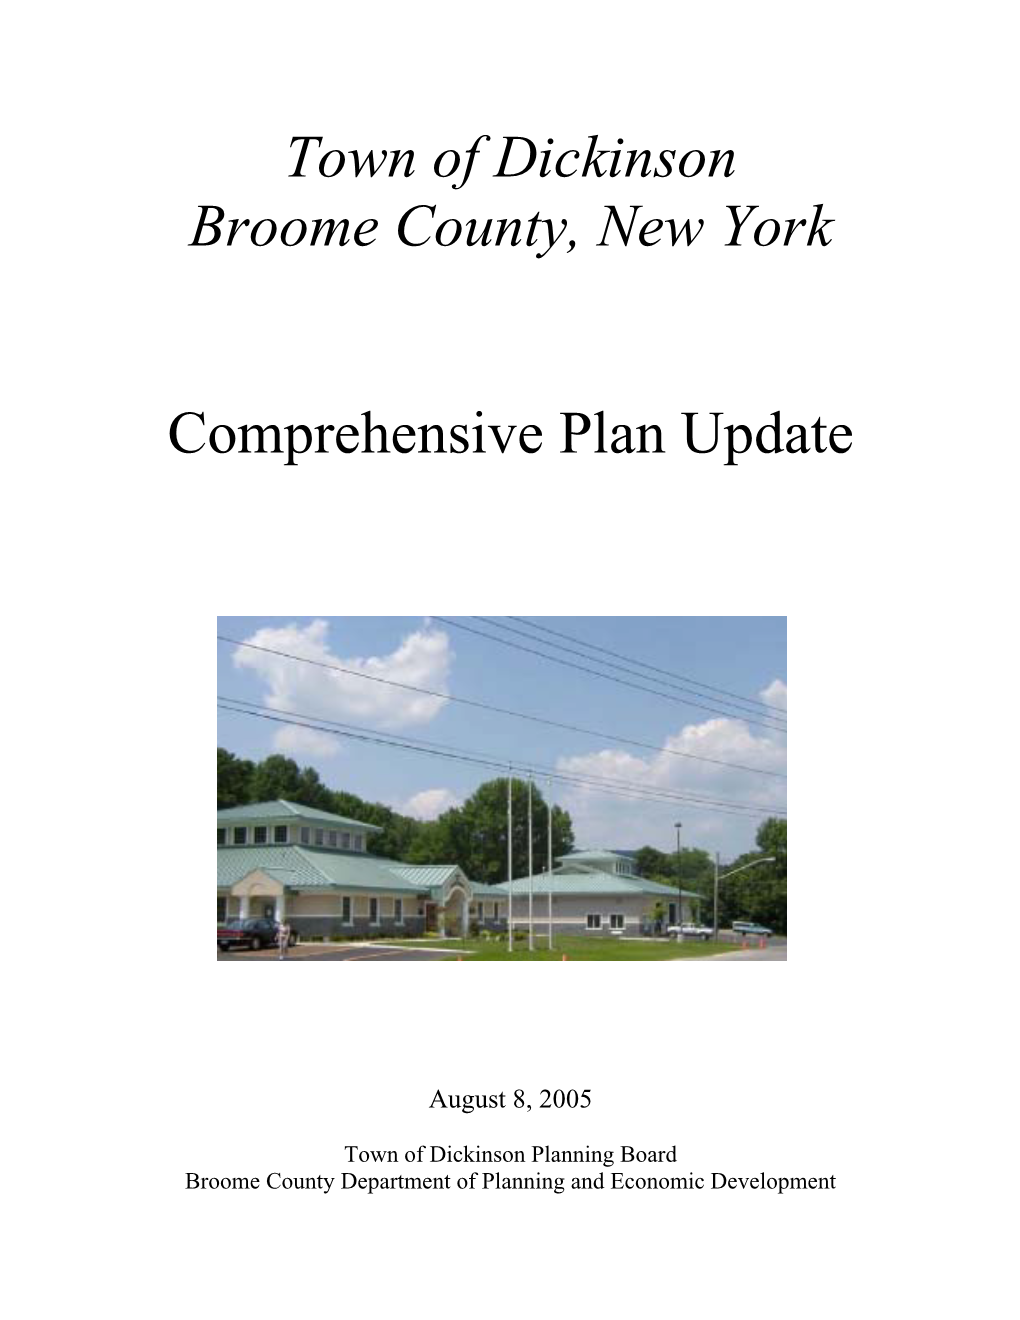 Town of Dickinson Broome County, New York Comprehensive Plan